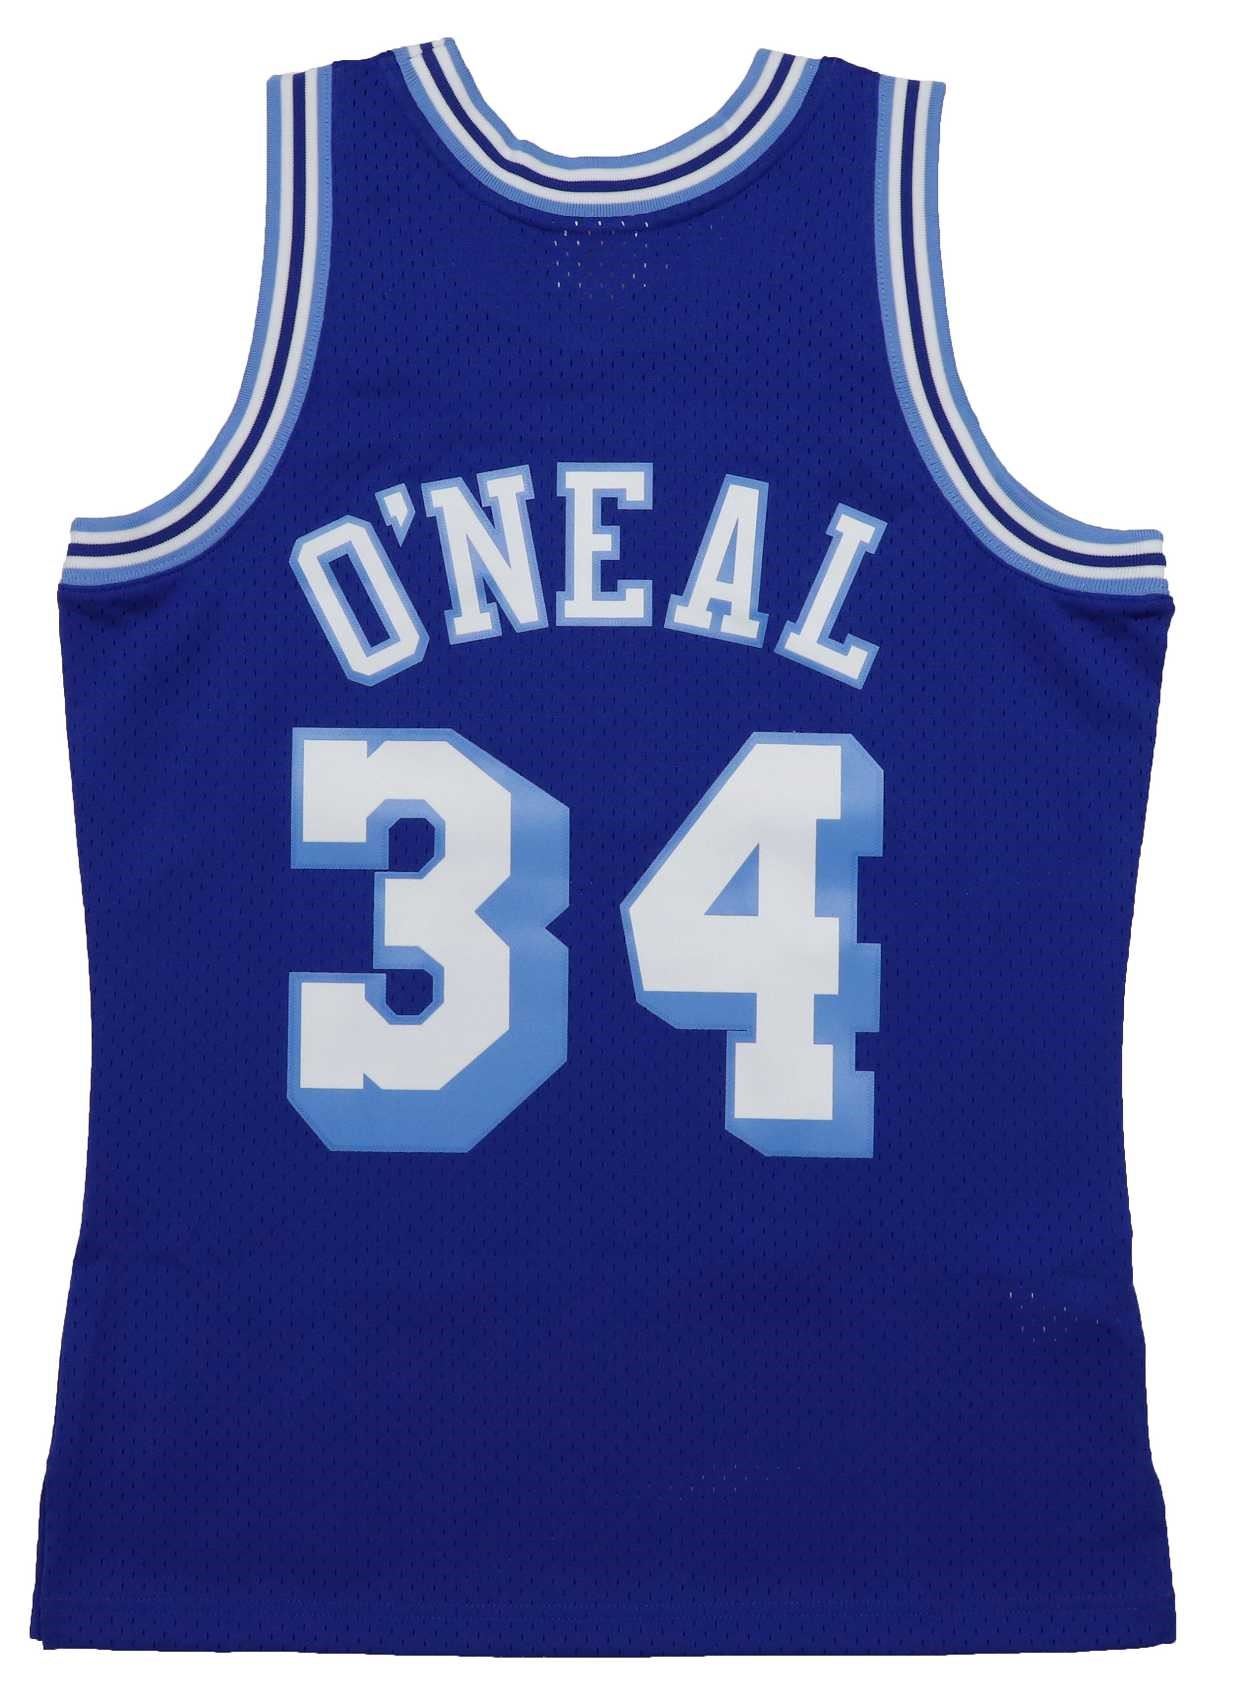 Shaquille Oneal #34 Los Angeles Lakers NBA Swingman Jersey Mitchell & Ness